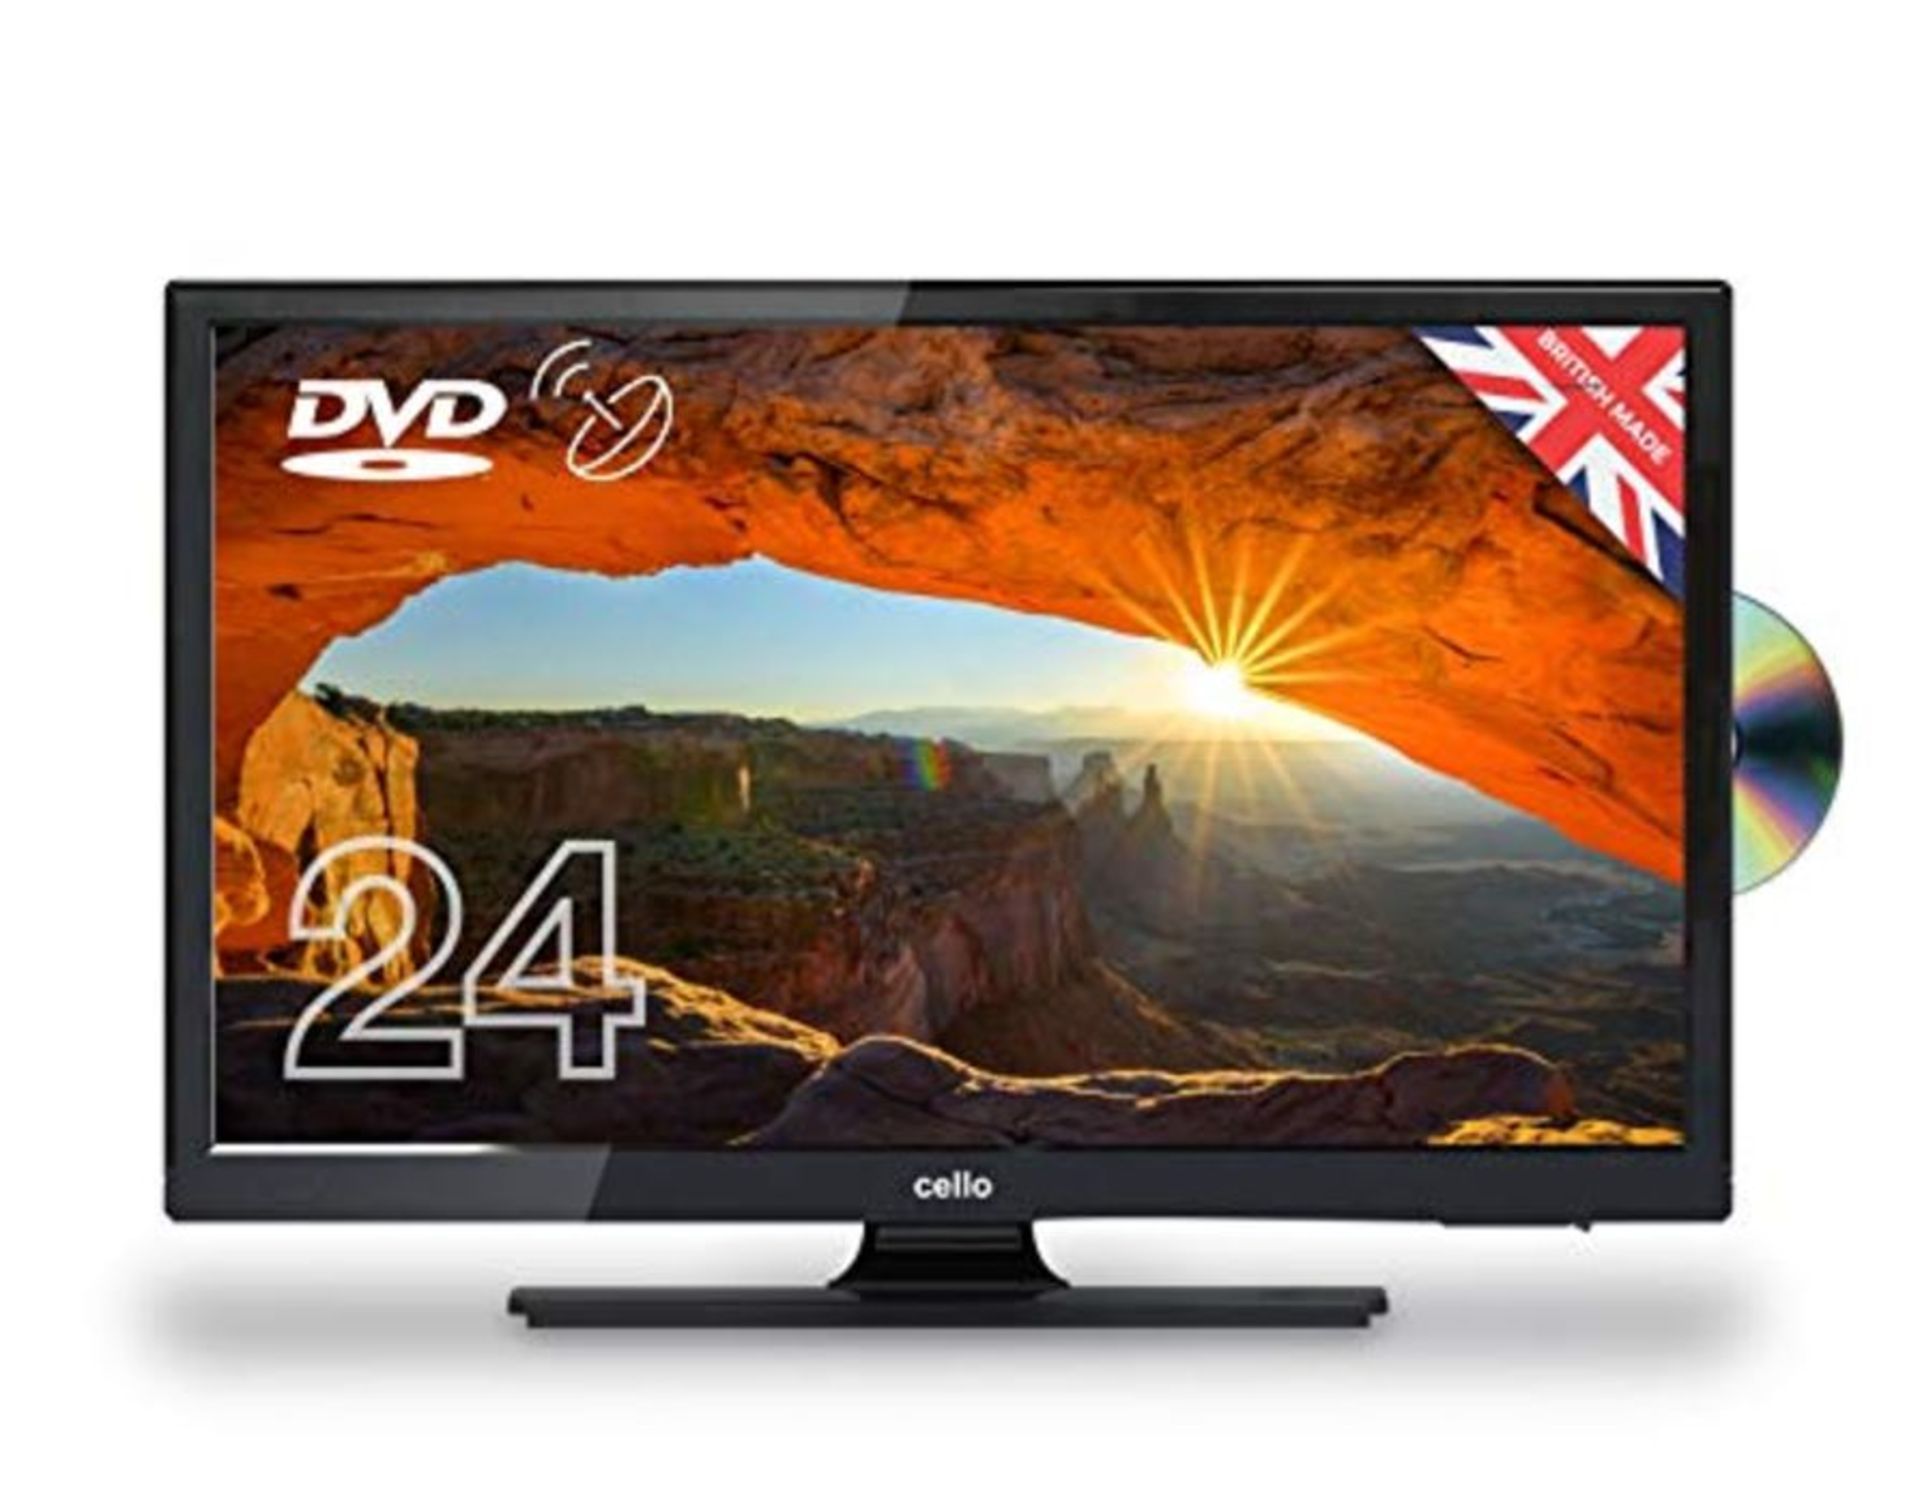 RRP £161.00 Cello C24230FT2 12 Volt LED TV/DVD Made In The UK 24 inch